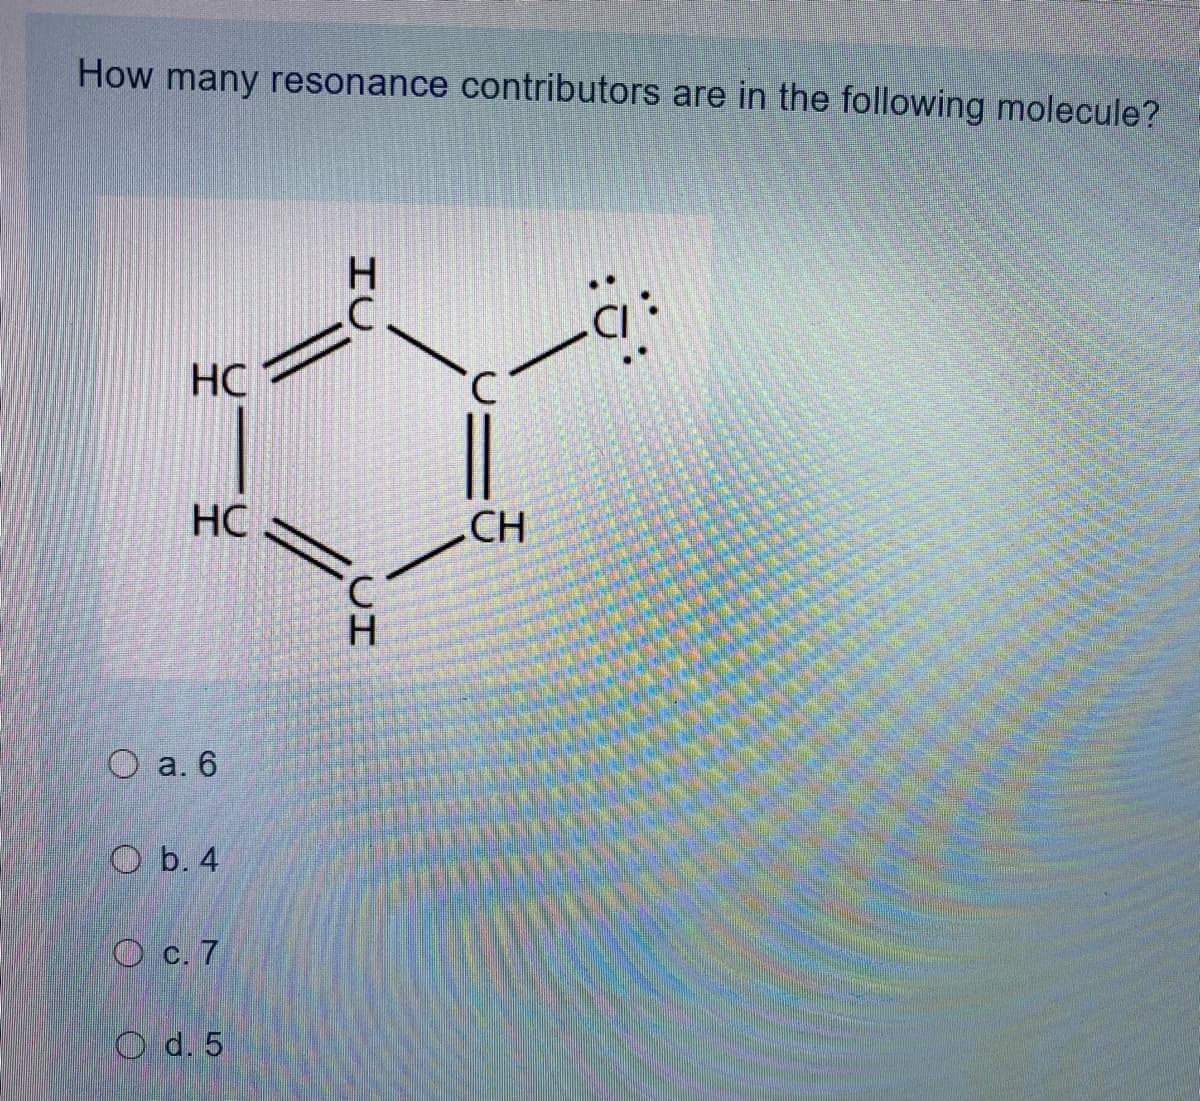 How many resonance contributors are in the following molecule?
:-
HC
HC
CH
H.
О а. 6
O b. 4
О с. 7
O d. 5
HC
